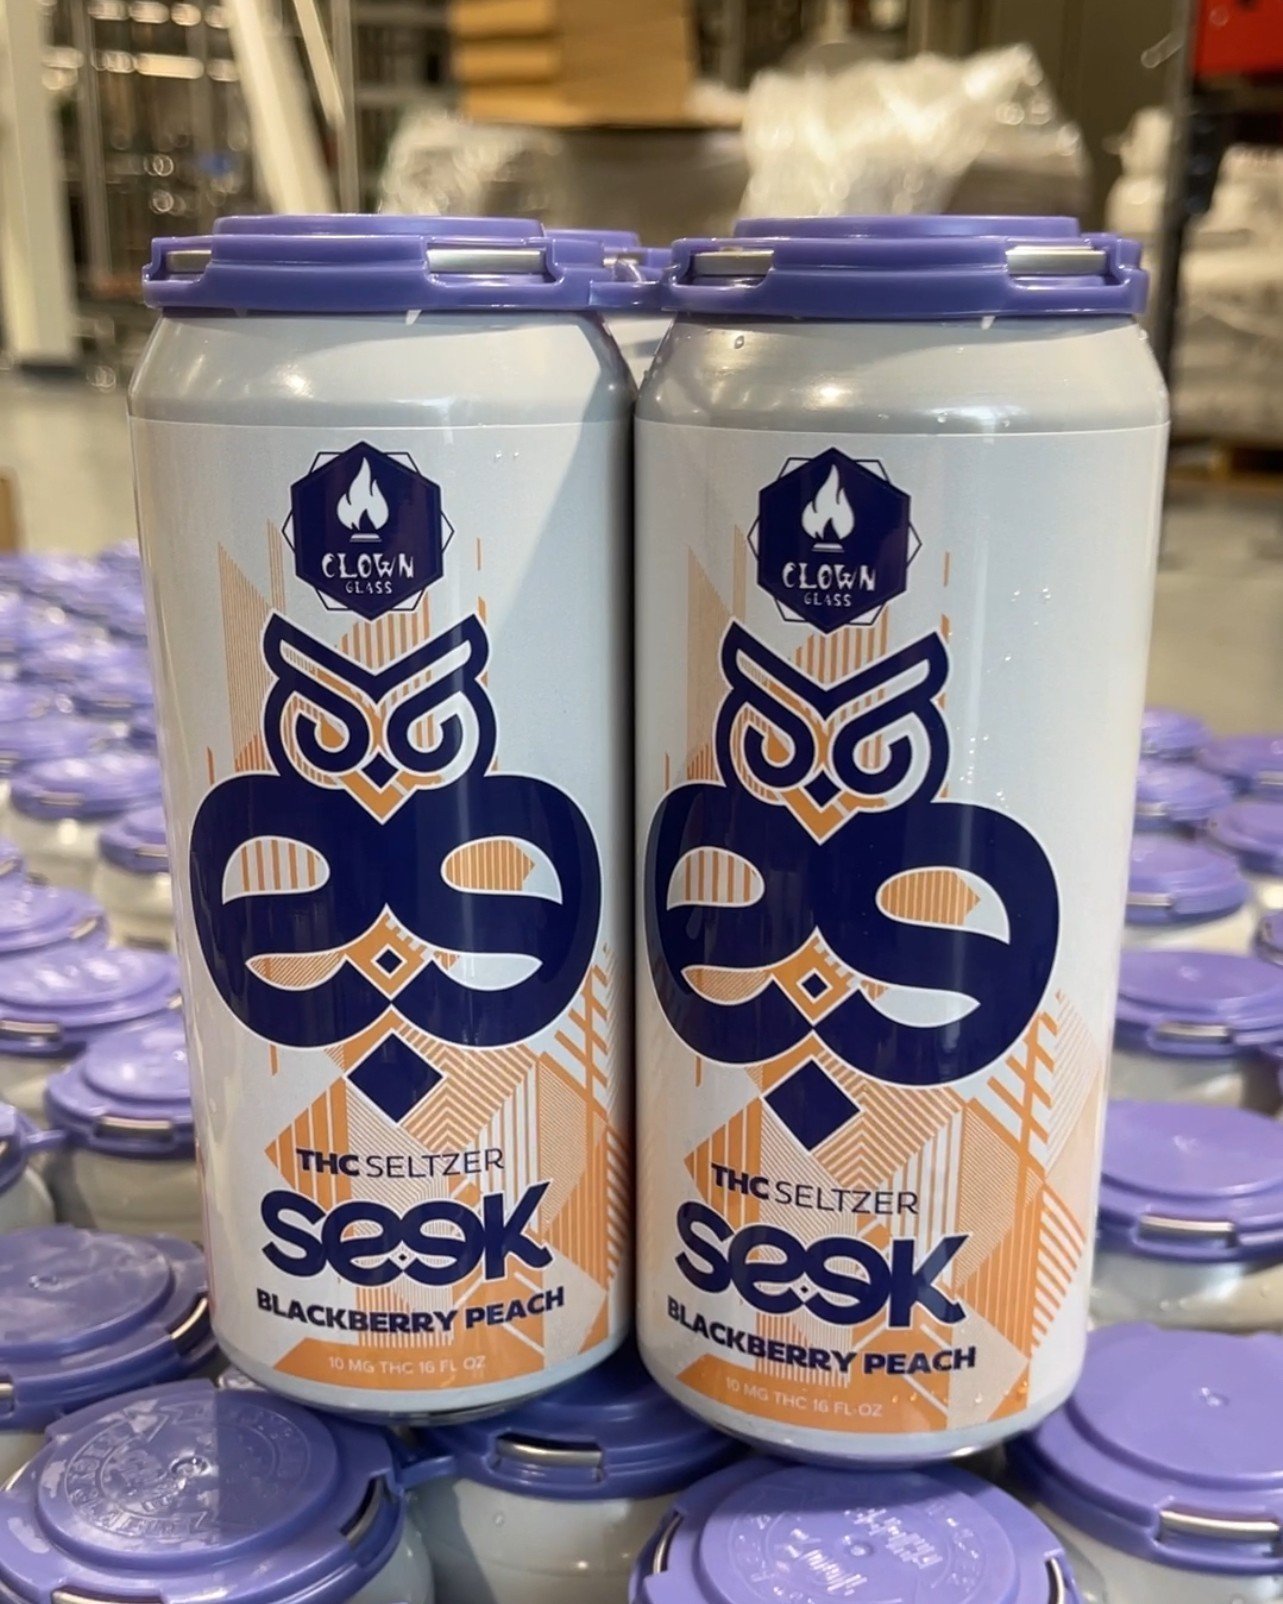 Get Mom what she really wants this Mother&rsquo;s Day- relaxation in a can 😎⚡️

It&rsquo;s SEEK Sunday, so treating Mom has never been easier! Taproom deals on all SEEK flavors all day! 

Stop by, enjoy the sun and SEEK some adventure today 🙃

#elm